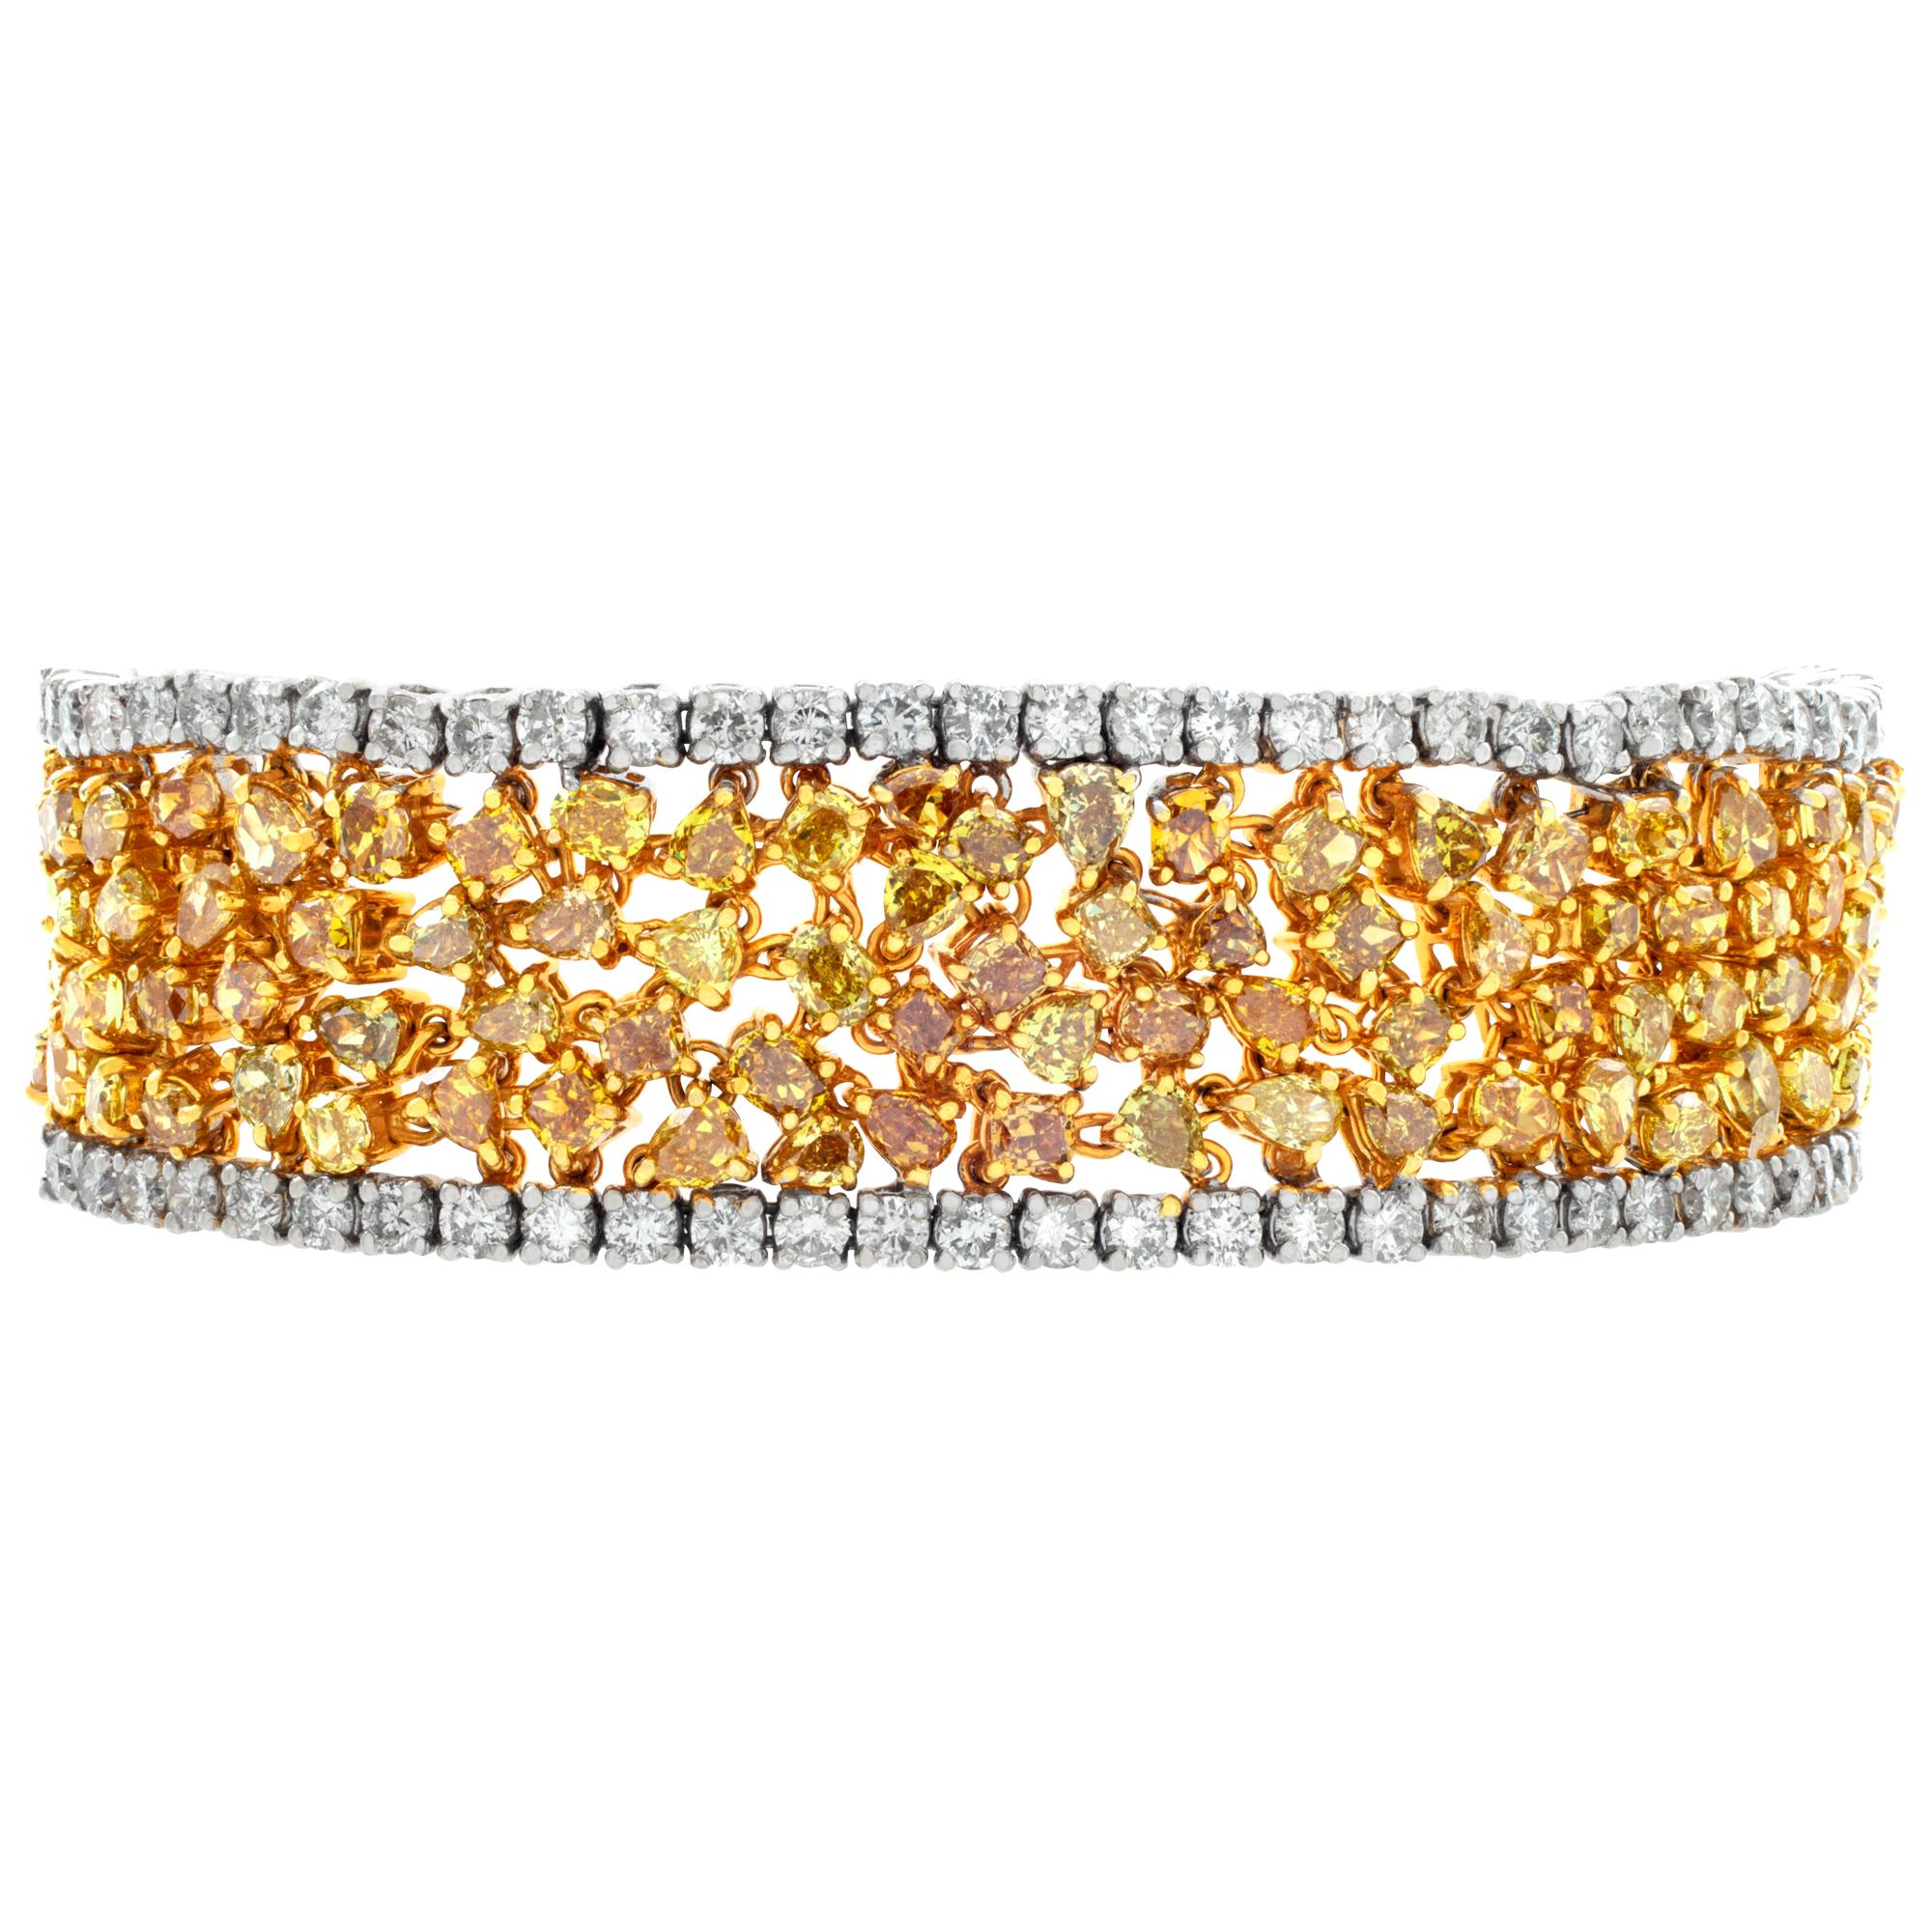 Stunning 18k yellow and white gold sparkly wide bracelet with 32.13 carats in miscellaneously cut fancy diamonds and white diamonds. Fit for 7'' wrist, 20mm wide.
